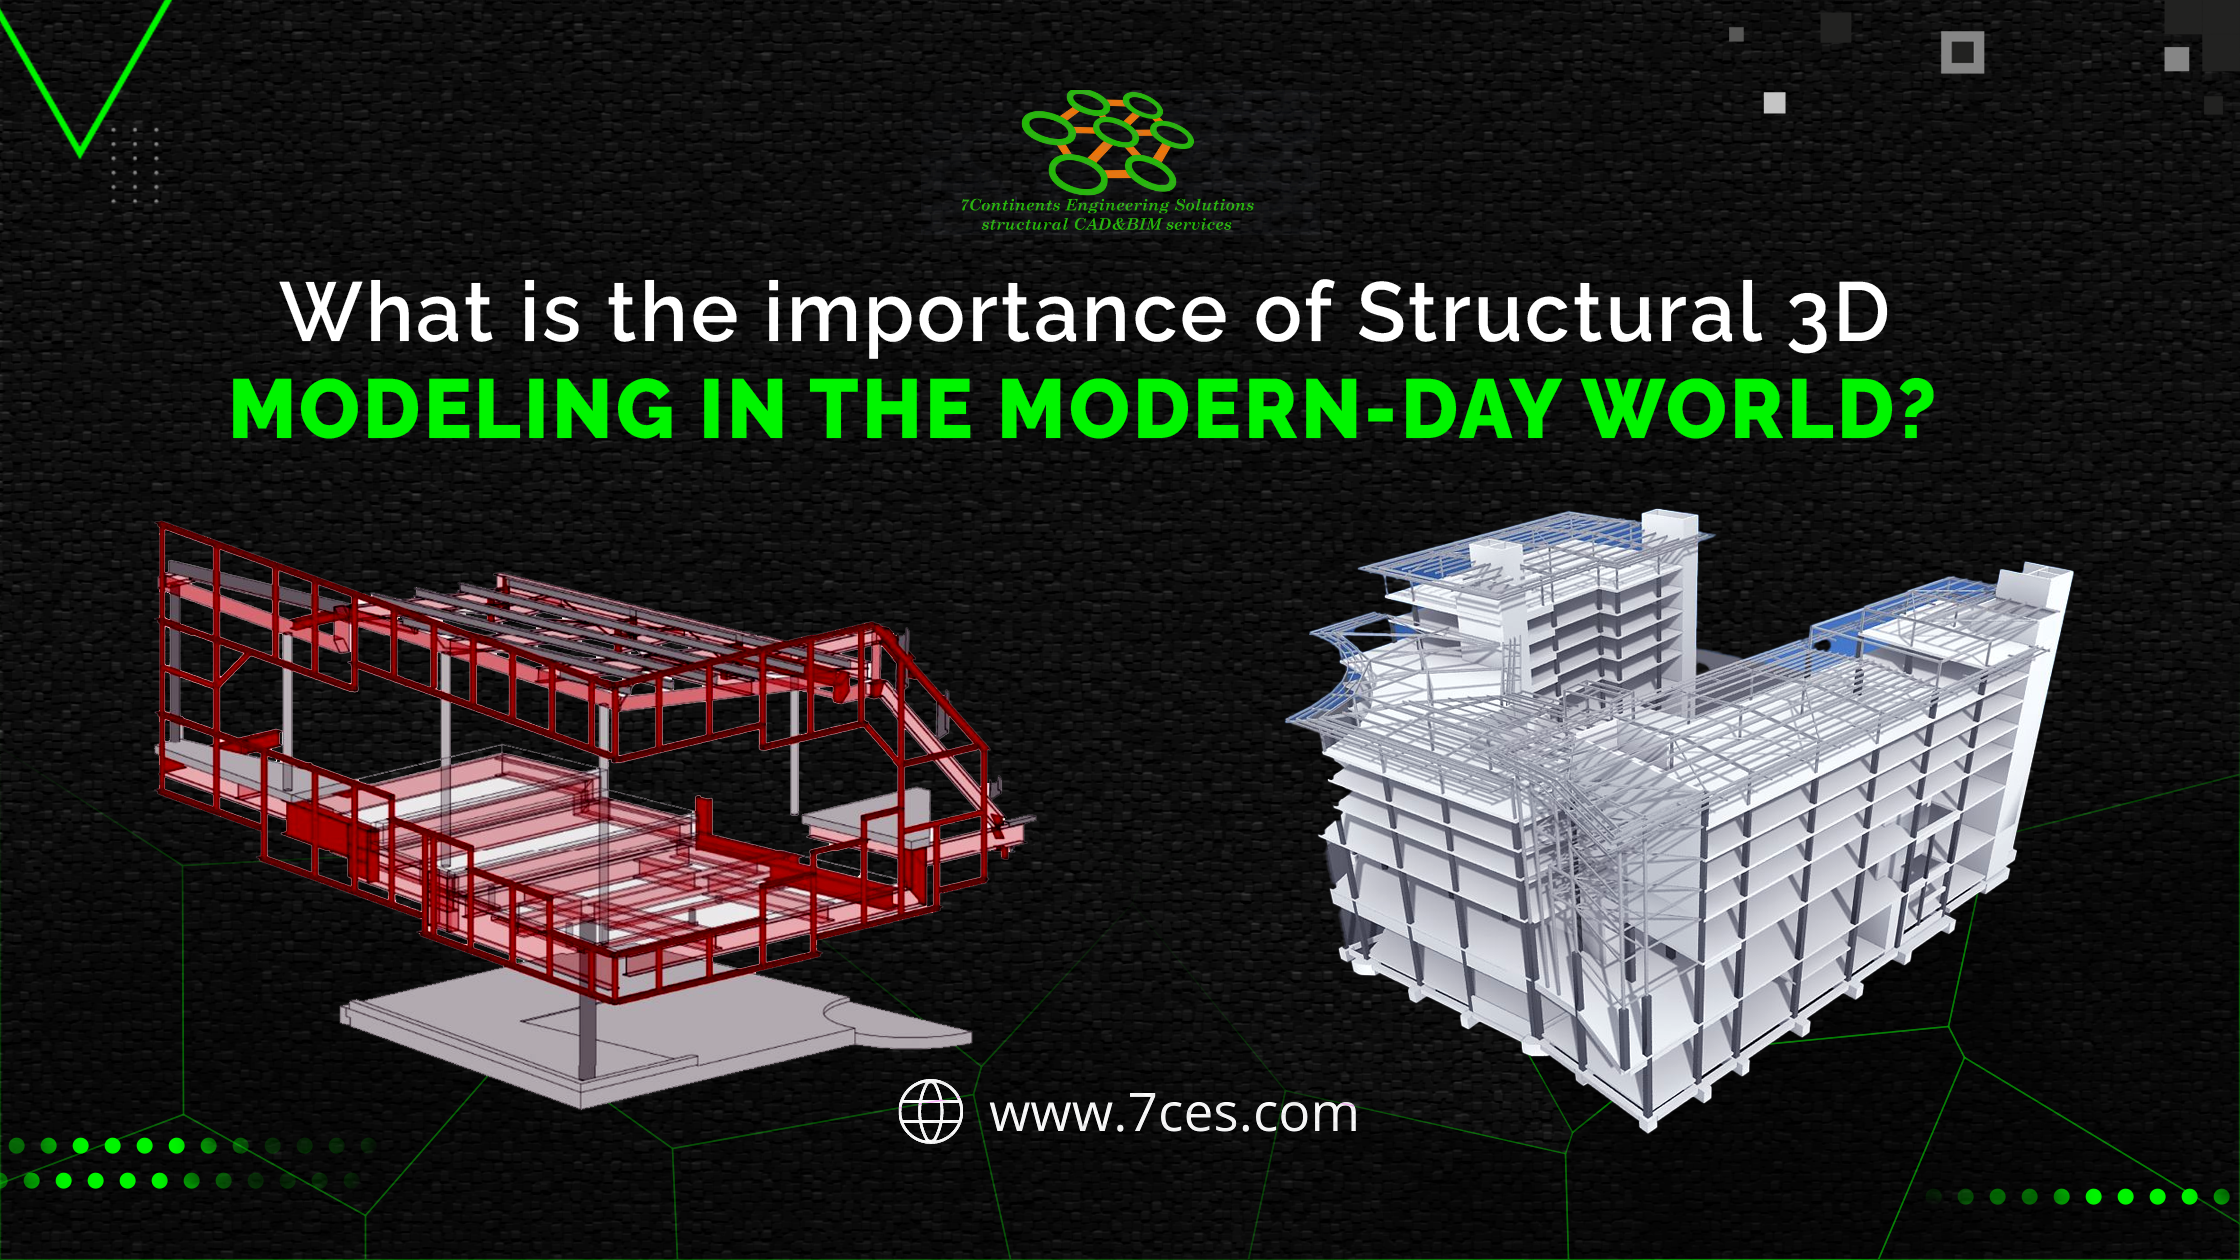 What is the importance of Structural 3D Modeling in the modern-day world?